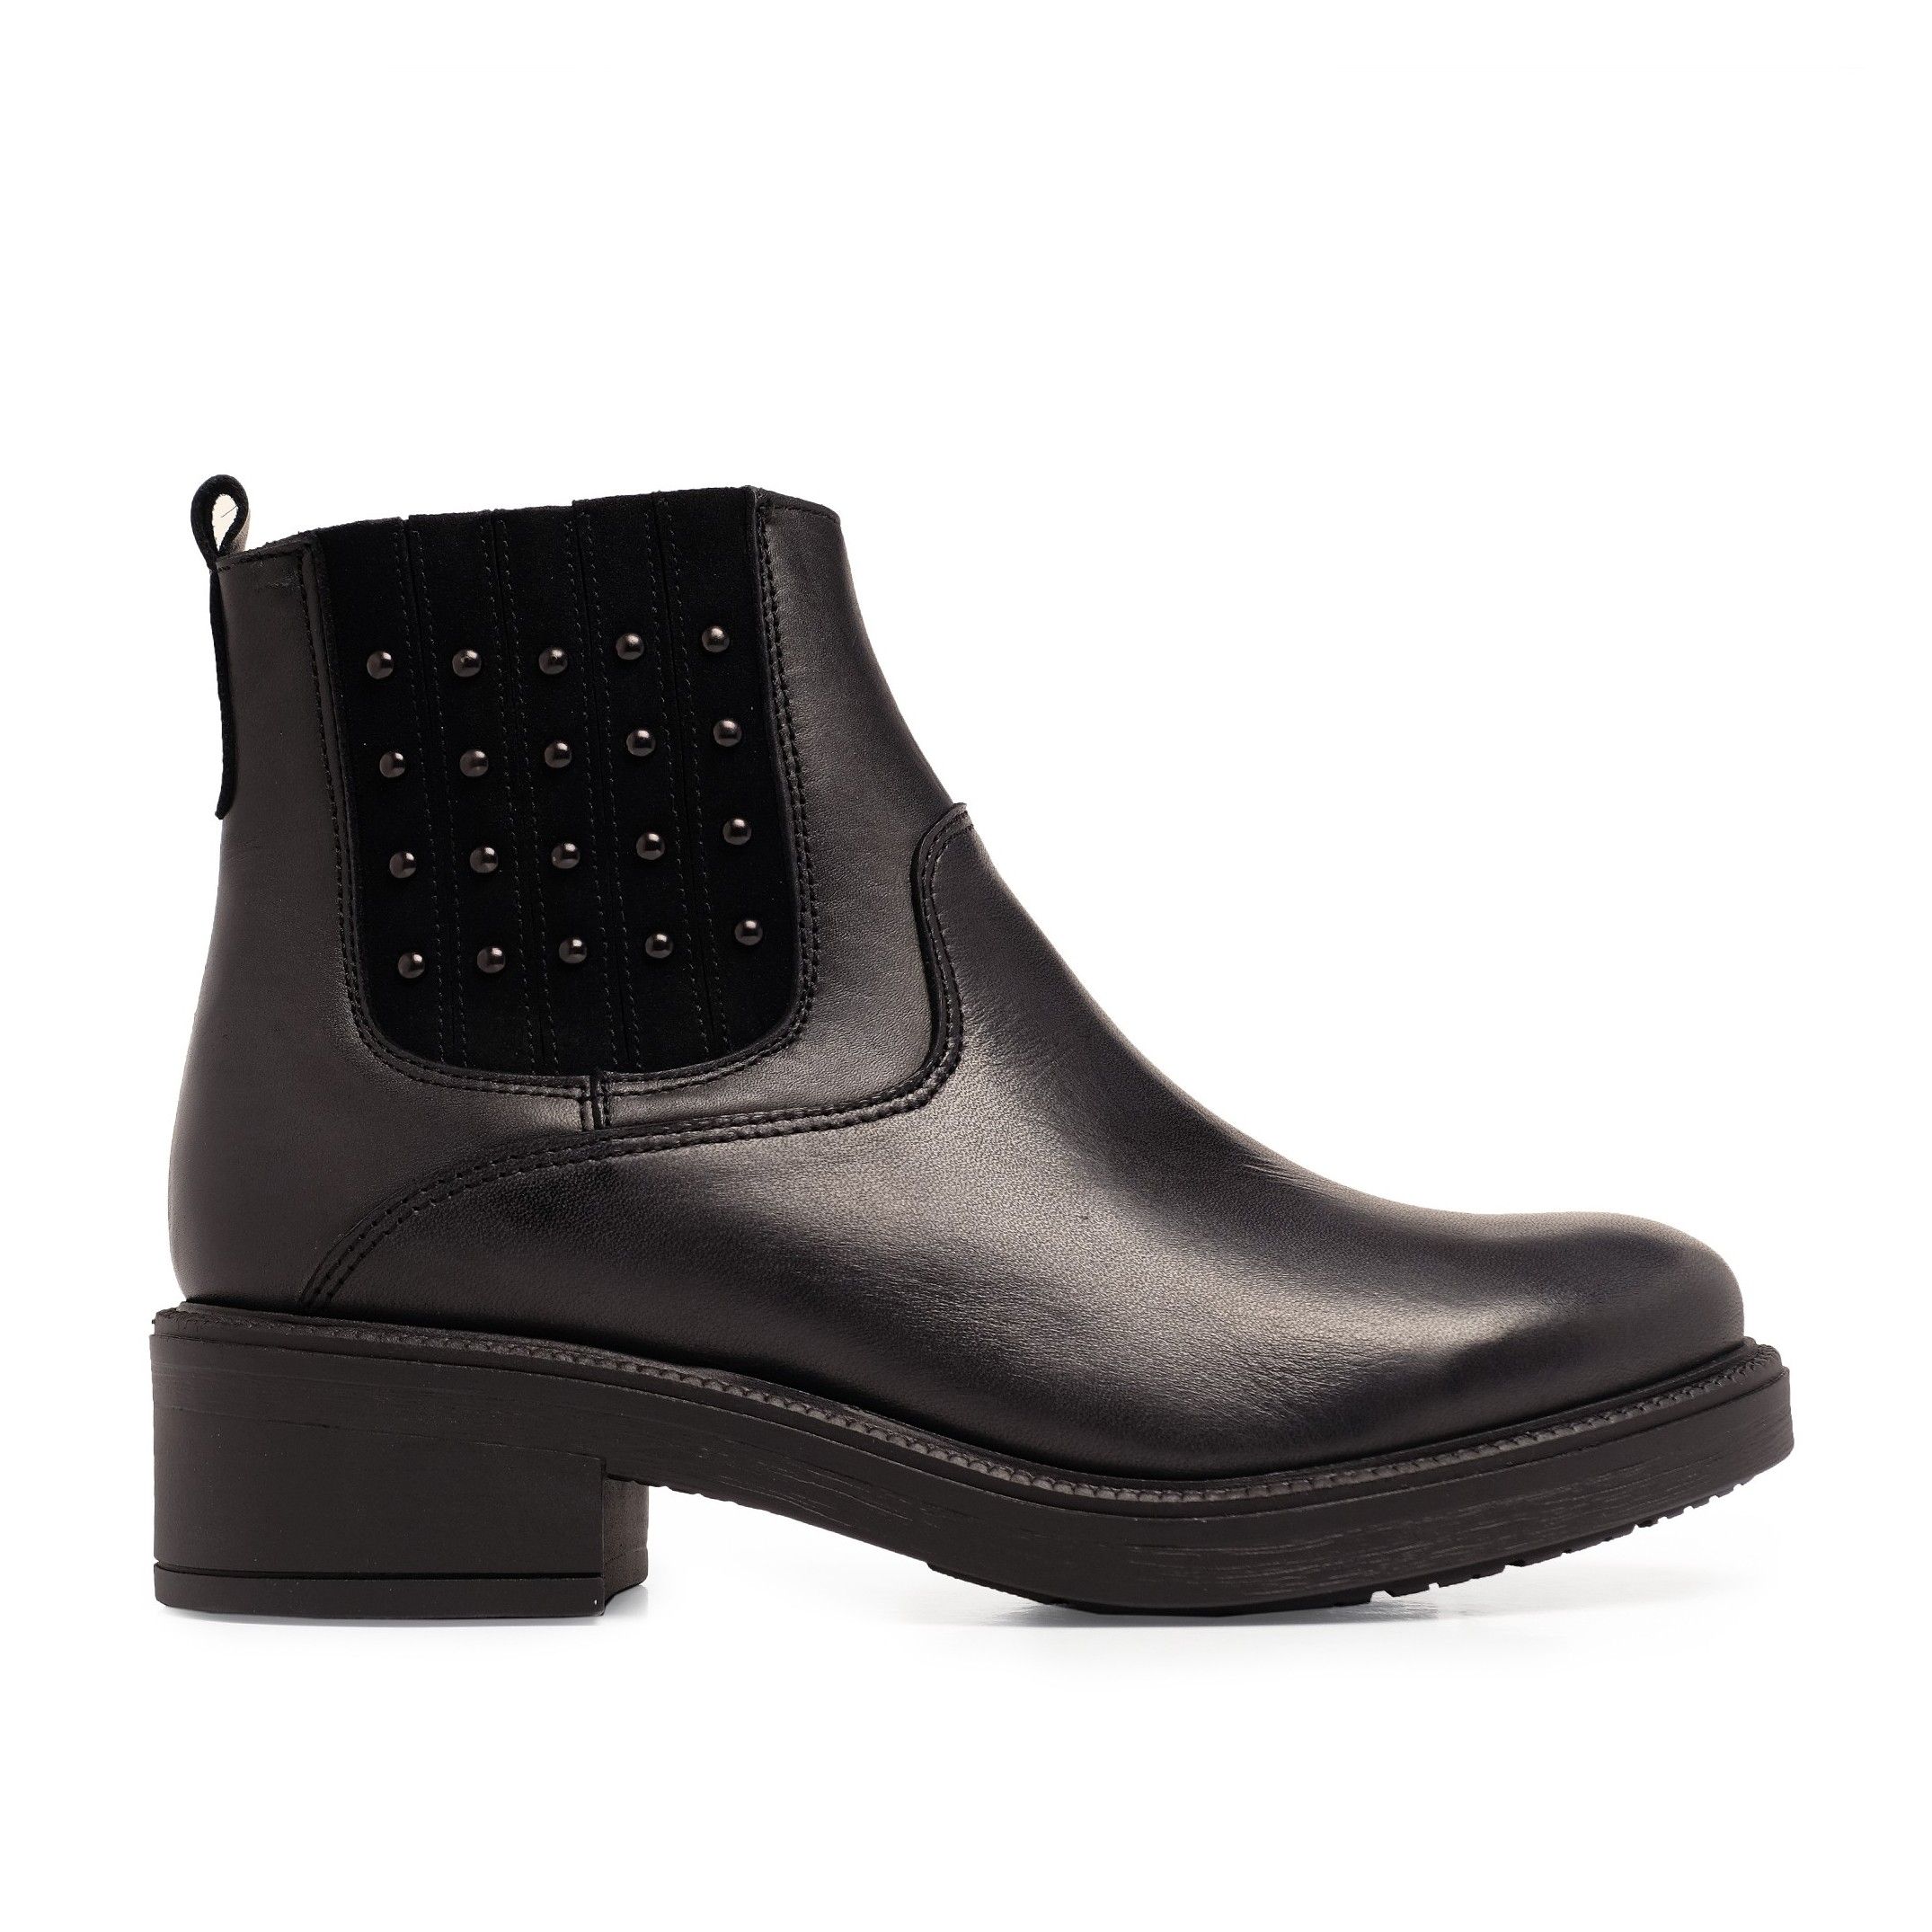 Leather chelsea boots for women. Elastic closure. Upper, inner and insole made of leather. Rubber sole. Platform: 1,5 cm. Wedge: 4,5 cm. Made in Spain.